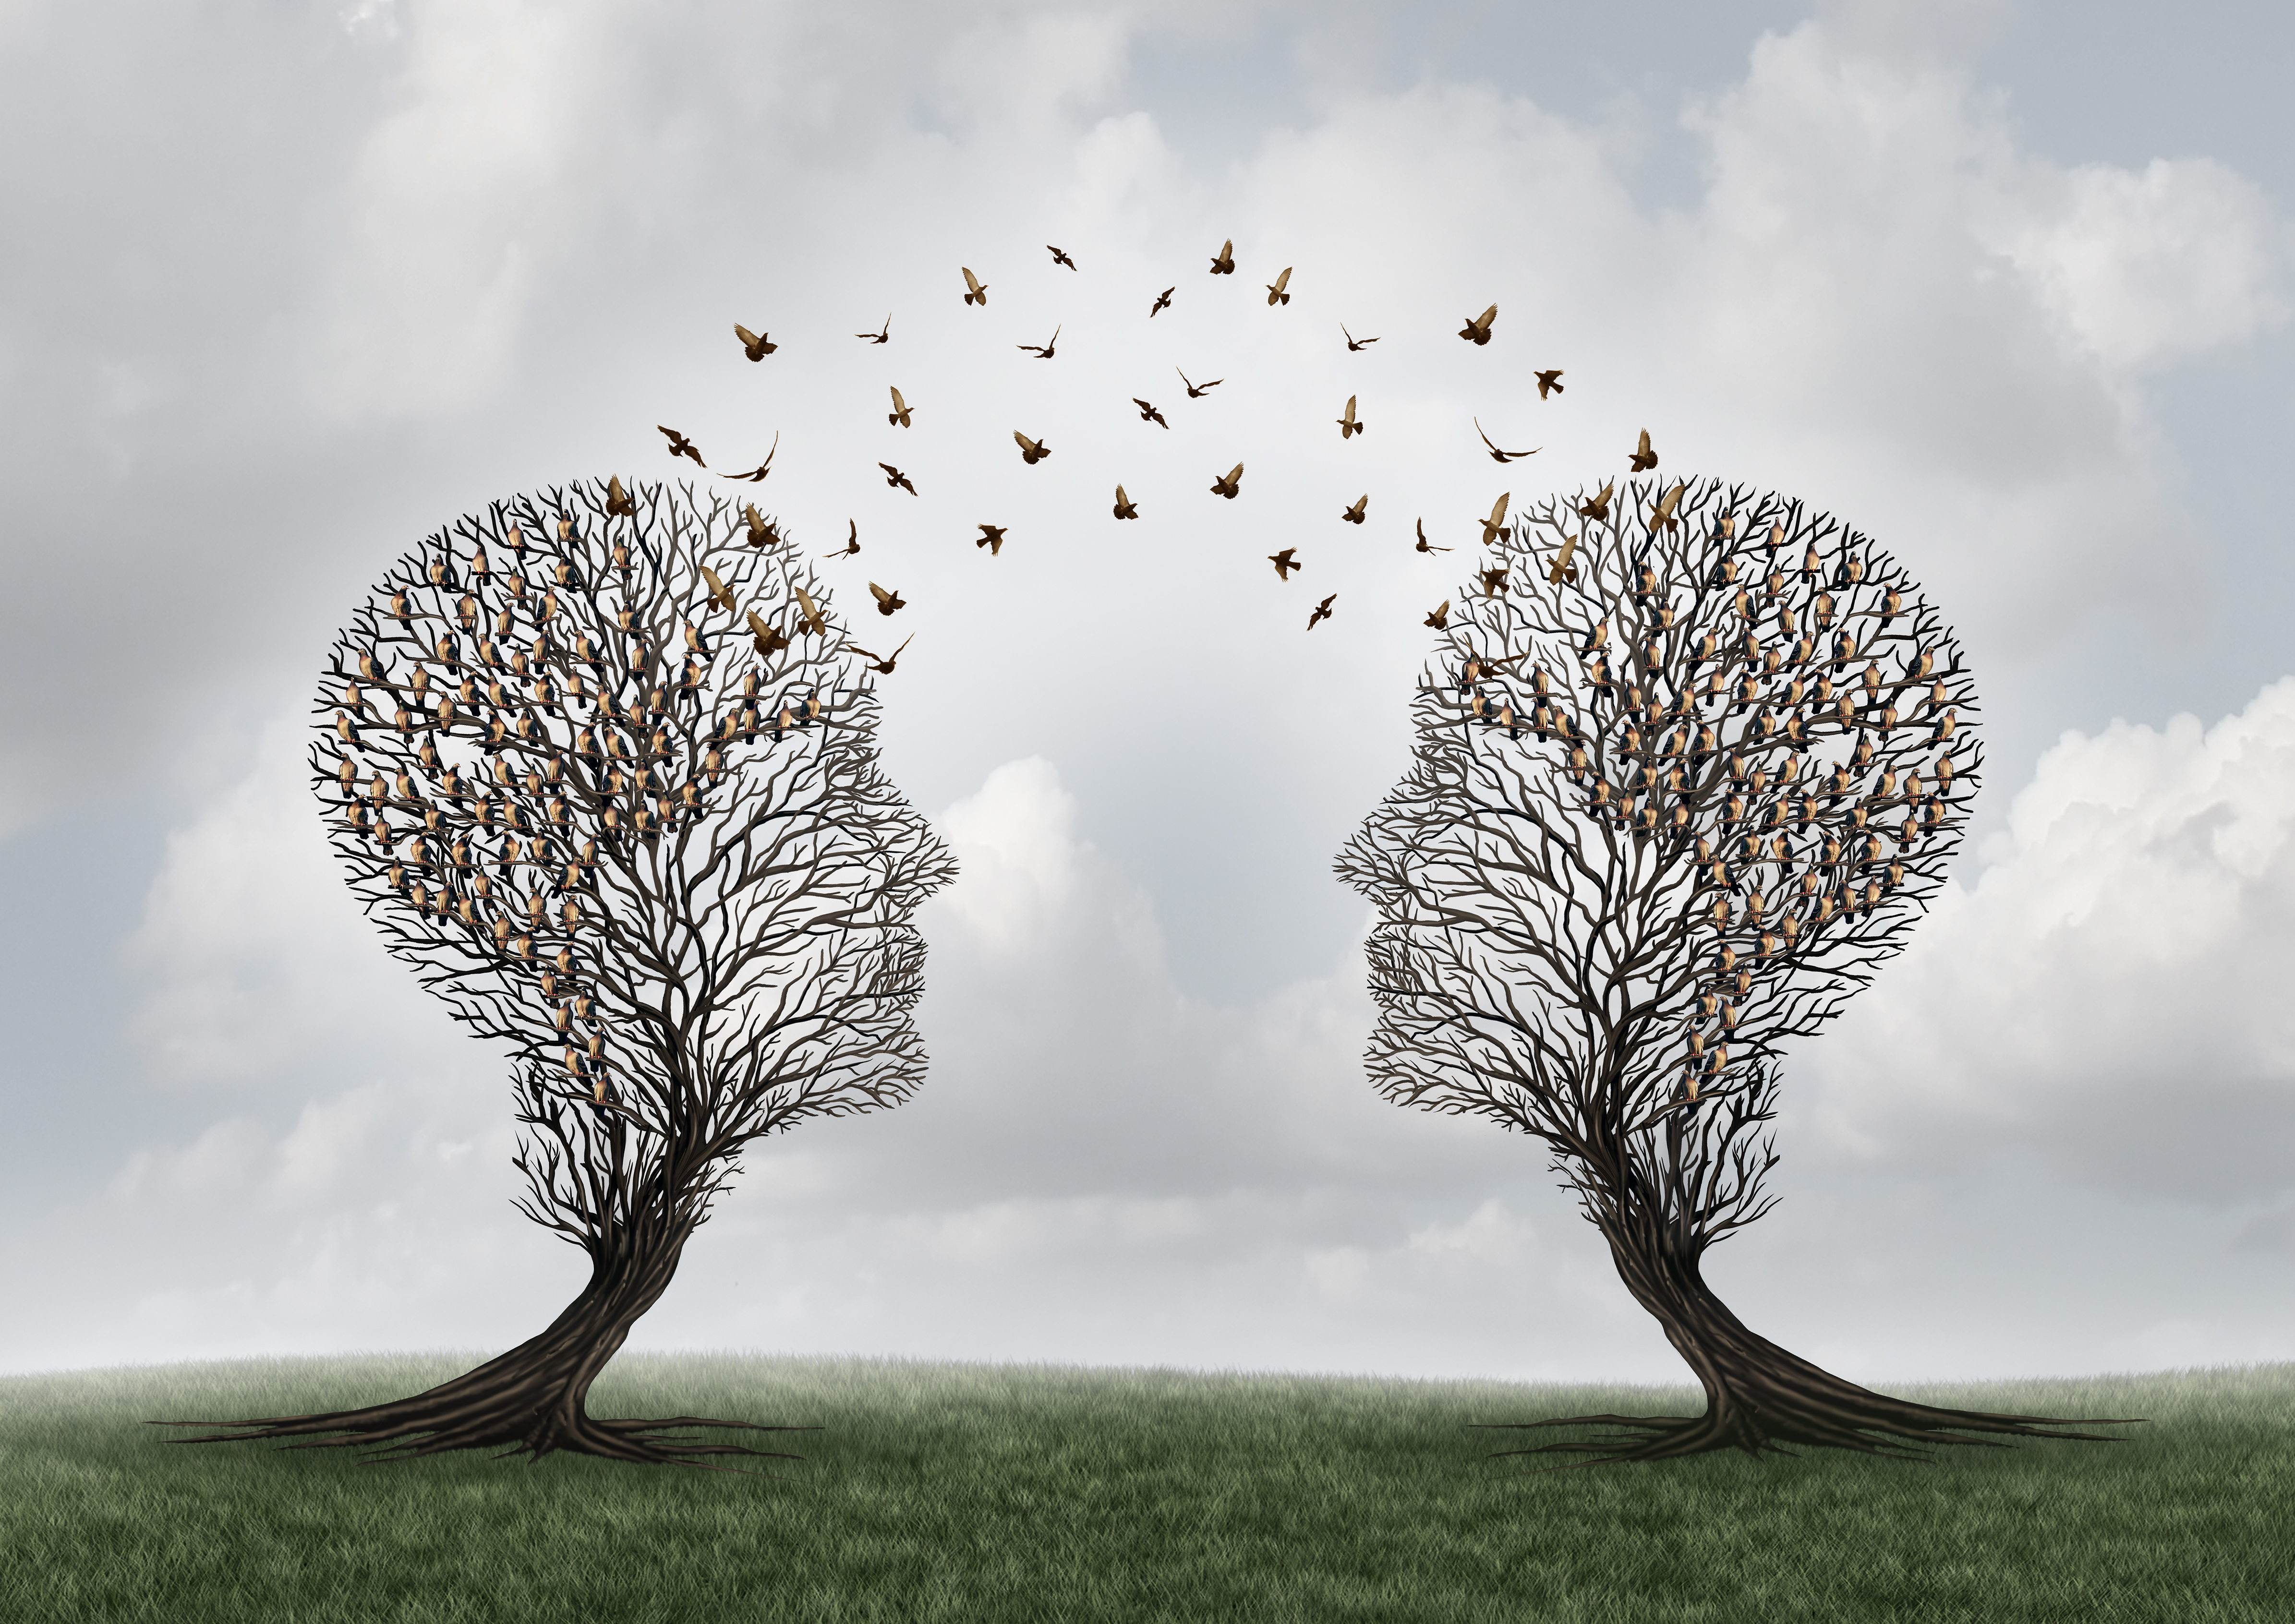 Revenue management outsourcing and mentorship image showing two head-shaped trees connected by birds